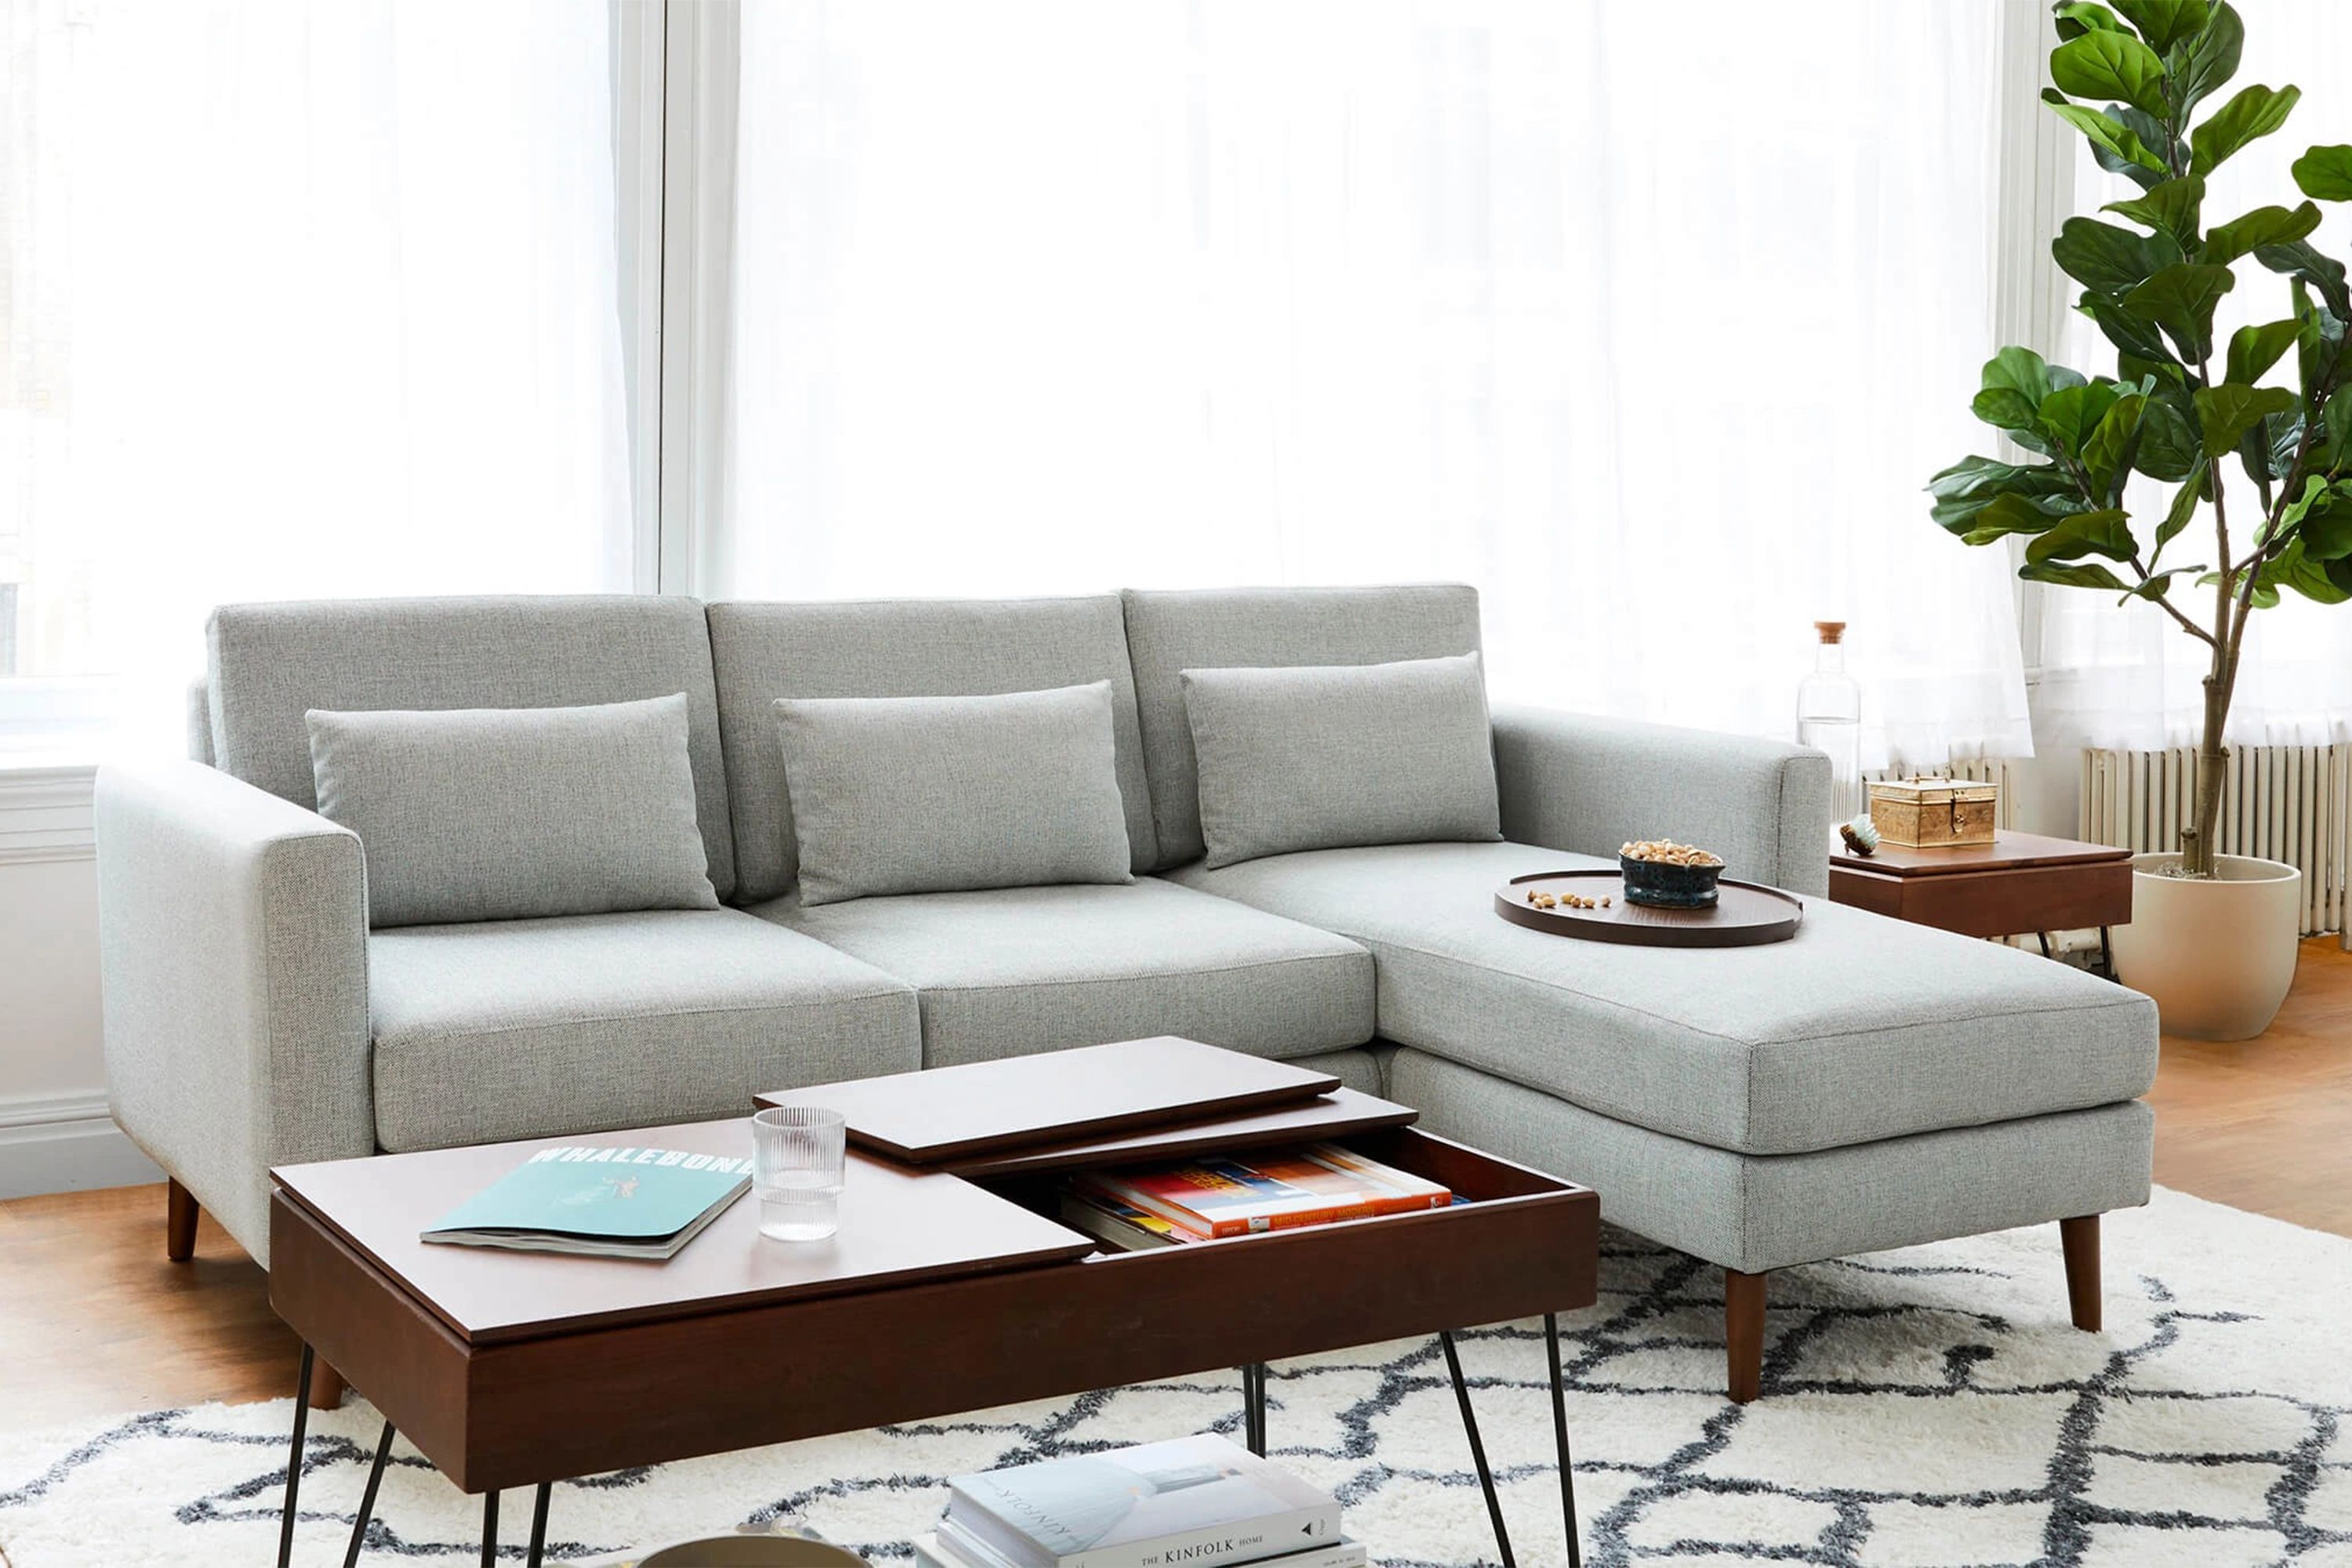 Burrow Nomad Sofa Review: A Comfortable, Easy-to-Assemble Couch